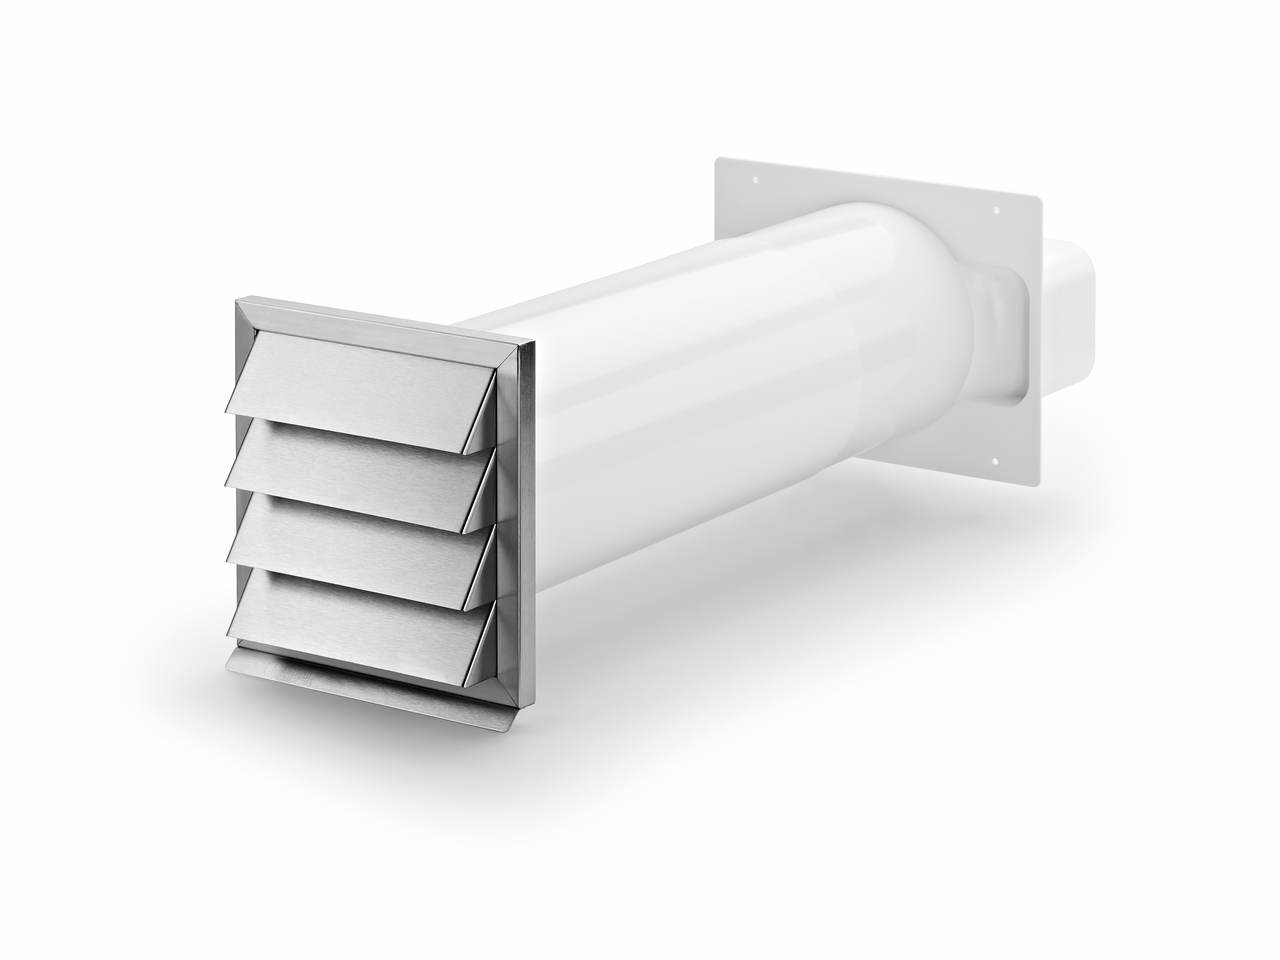  Klima-E flow 150 wall conduct, white, stainless steel